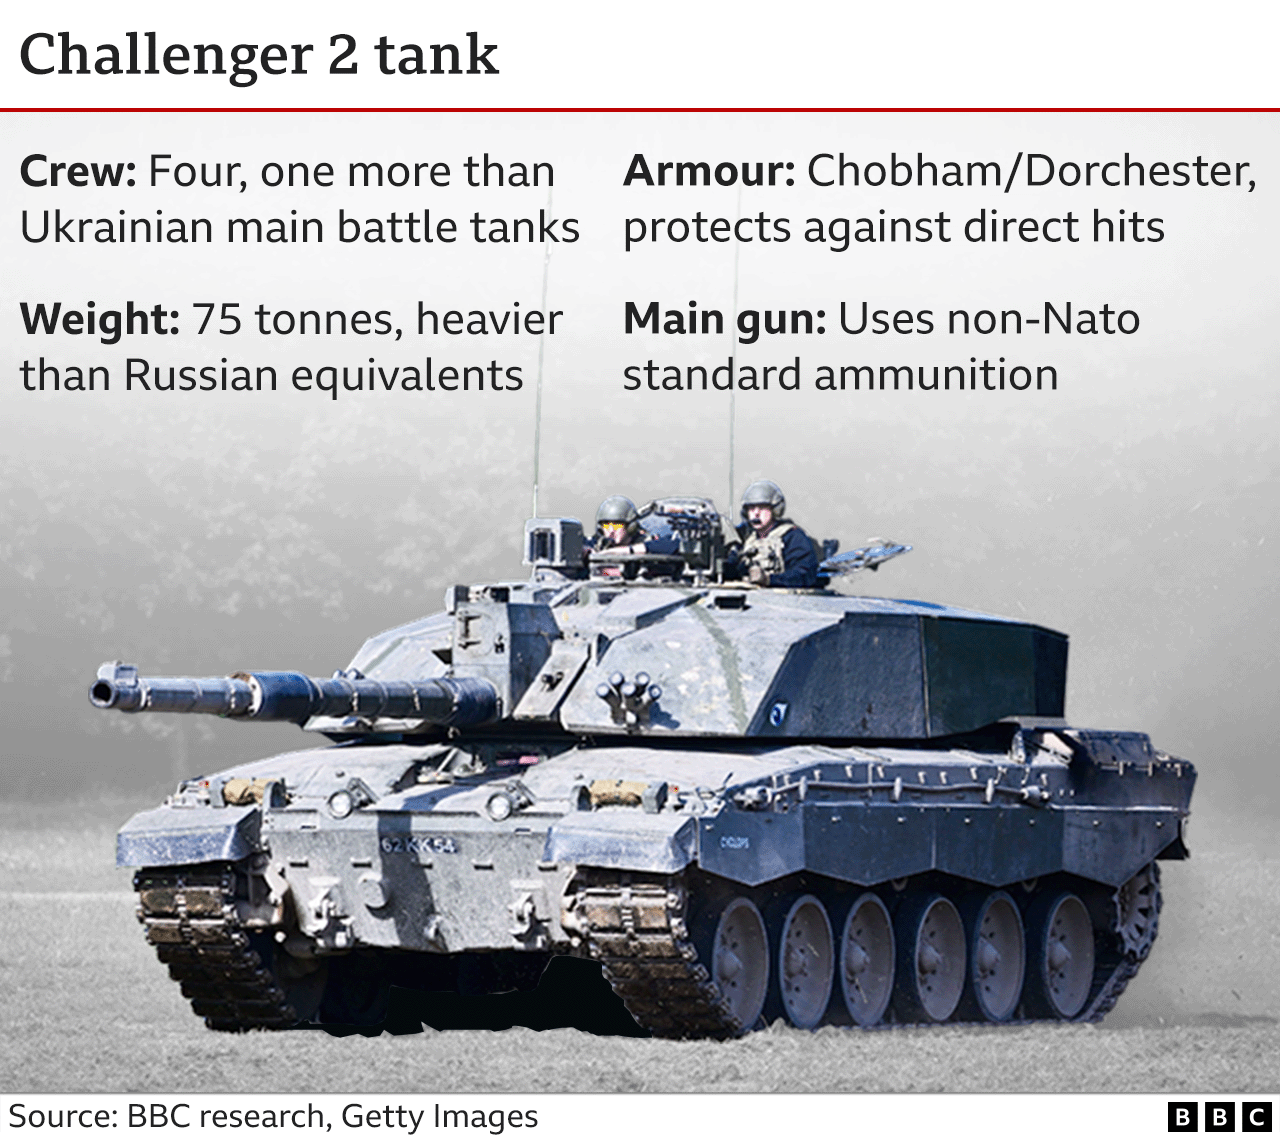 Graphic showing characteristics of the British-made Challenger 2 tank. The Challenger 2 is heavier and better armoured than Russian or Soviet-made tanks.